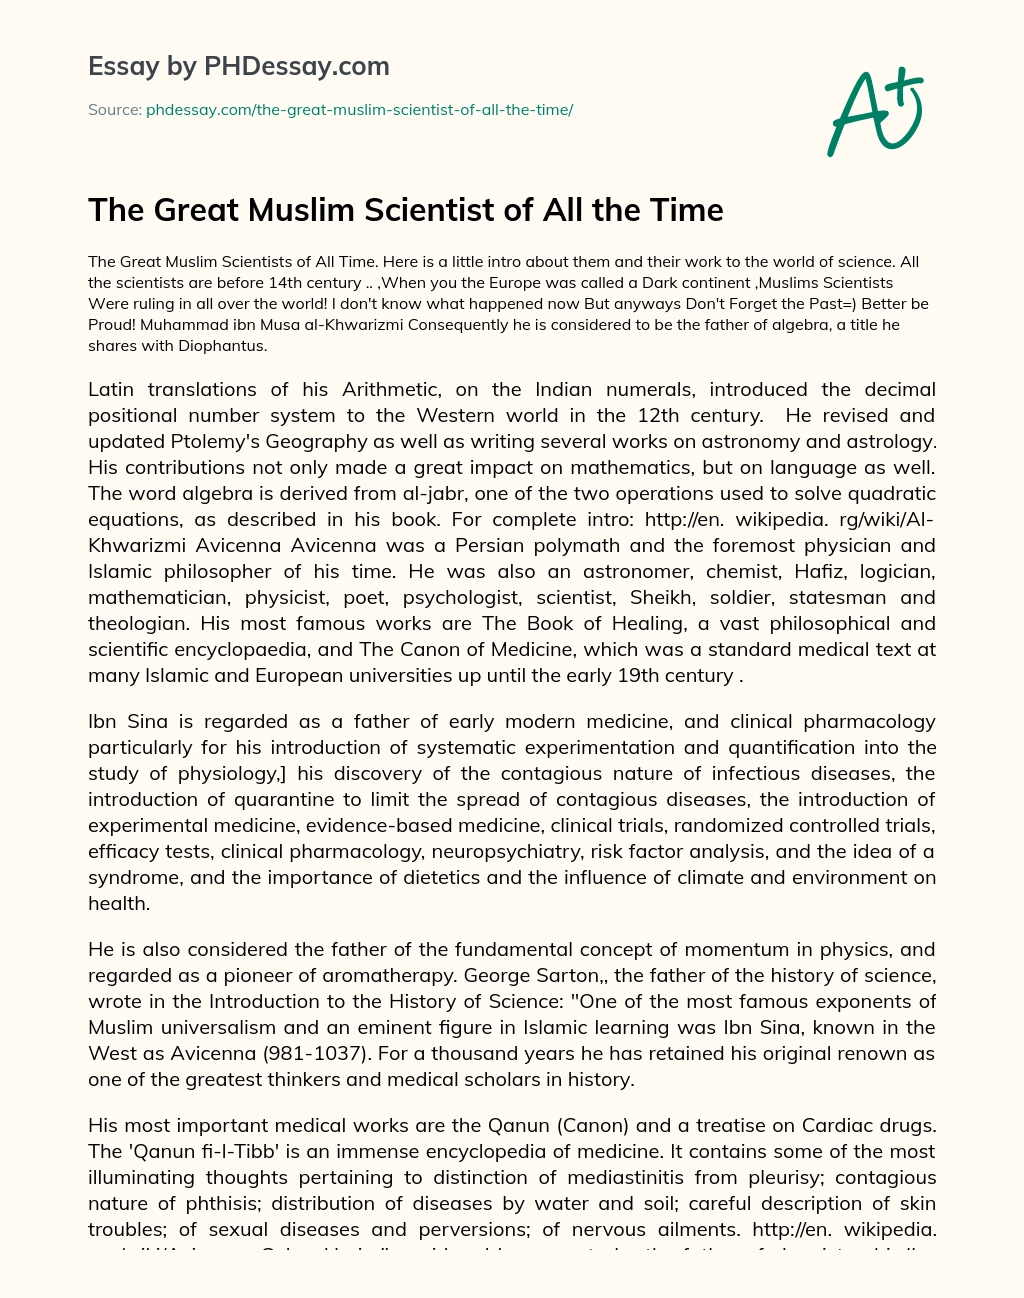 The Great Muslim Scientist of All the Time essay